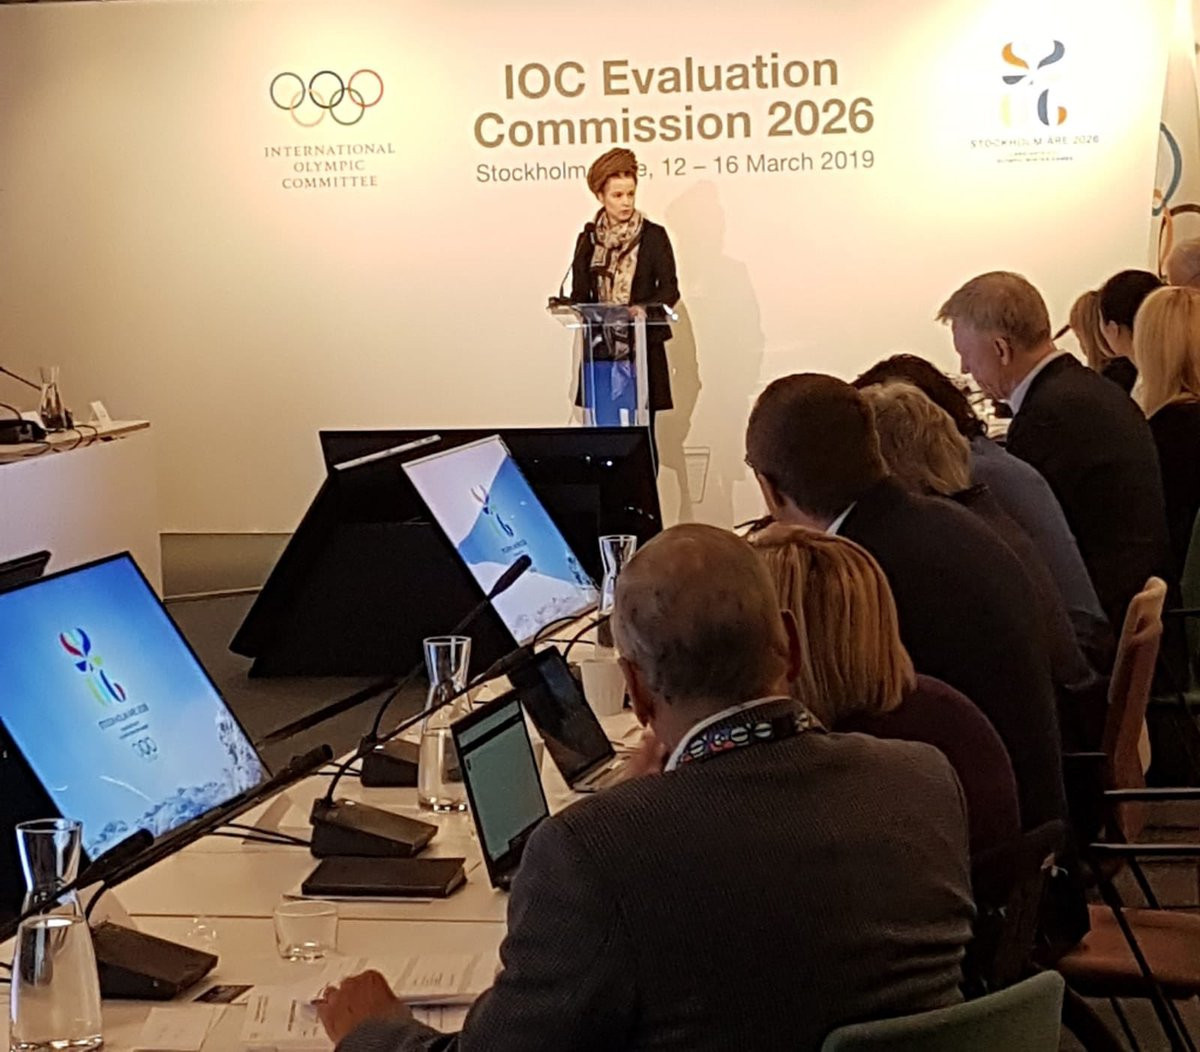 Sweden's Minister of Culture and Sport Amanda Lind addressed the IOC Evaluation Commission today during their inspection of Stockholm Åre 2026 ©IOC